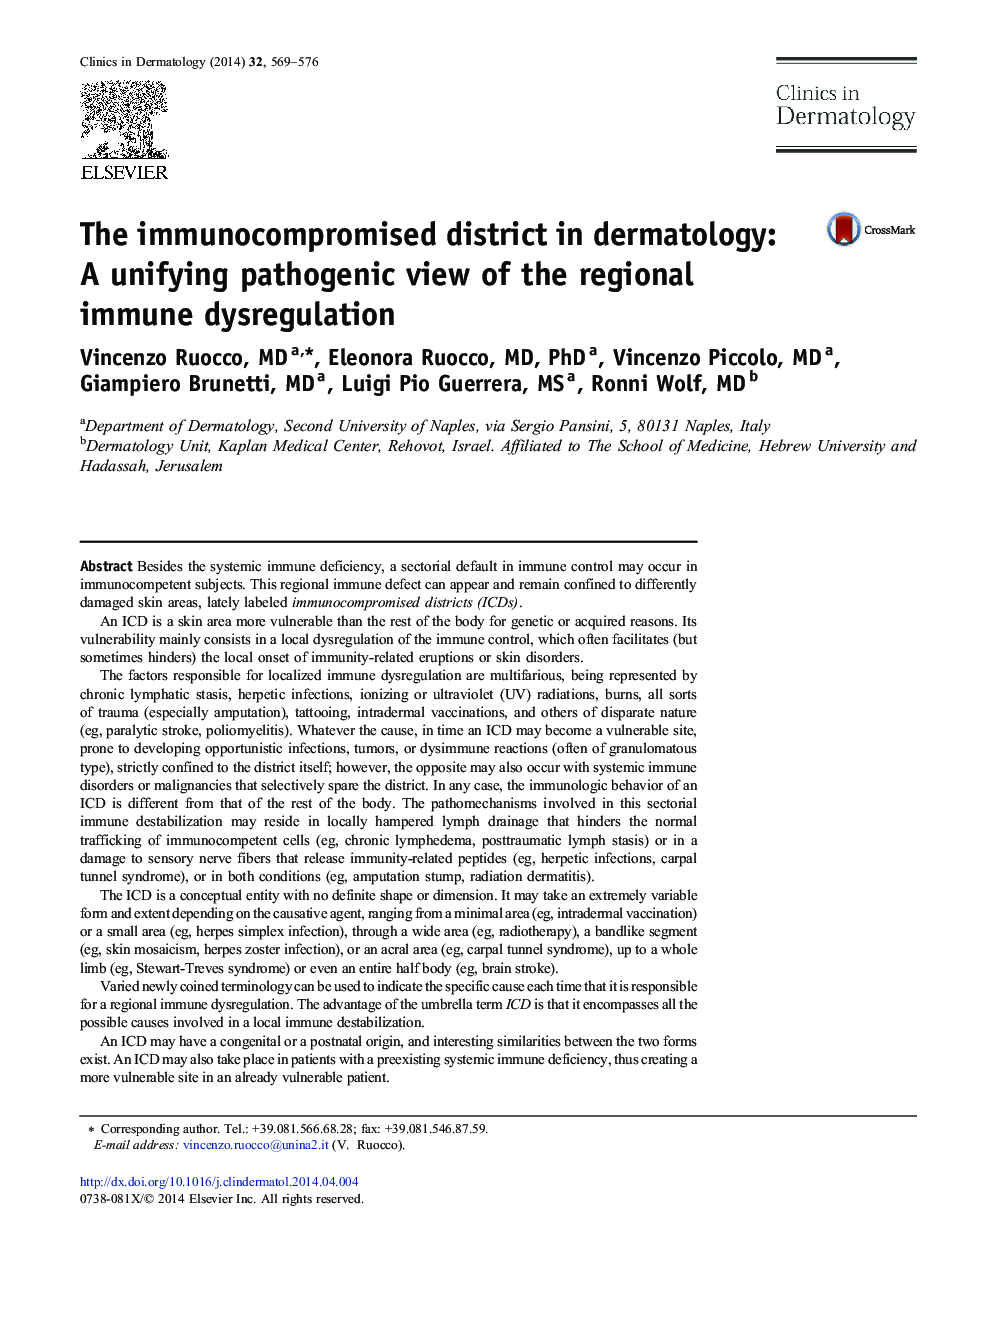 The immunocompromised district in dermatology: A unifying pathogenic view of the regional immune dysregulation